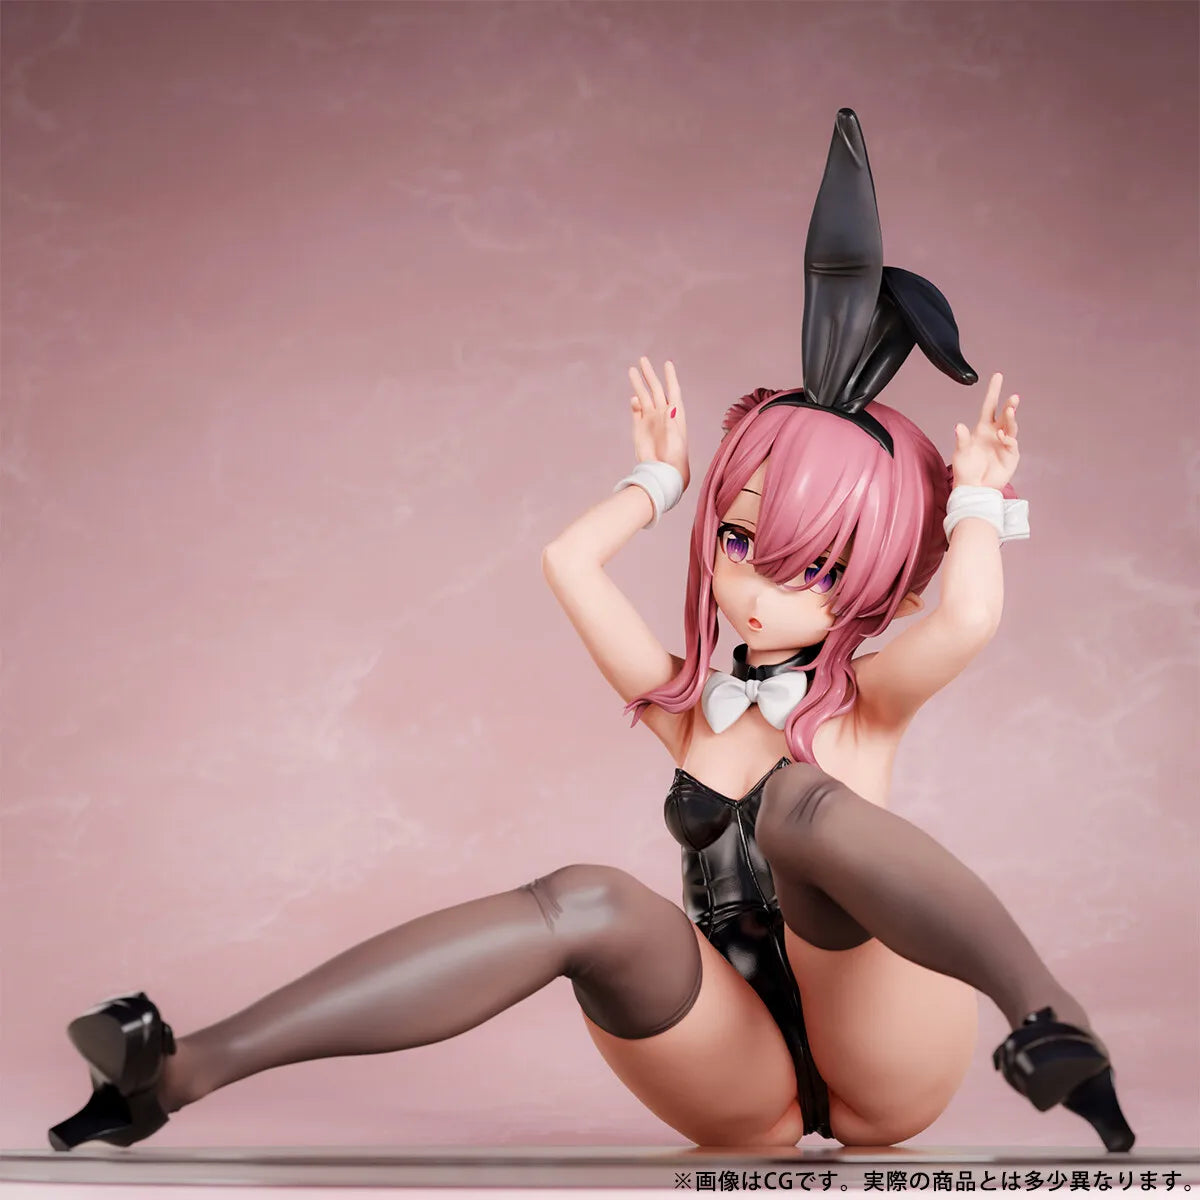 NSFW Bfull FOTS JAPAN Rainier-chan Bunny Girl Tsuishi Eye ver Sexy Girl PVC Action Figure Toy Adults Collection Model Doll Gifts